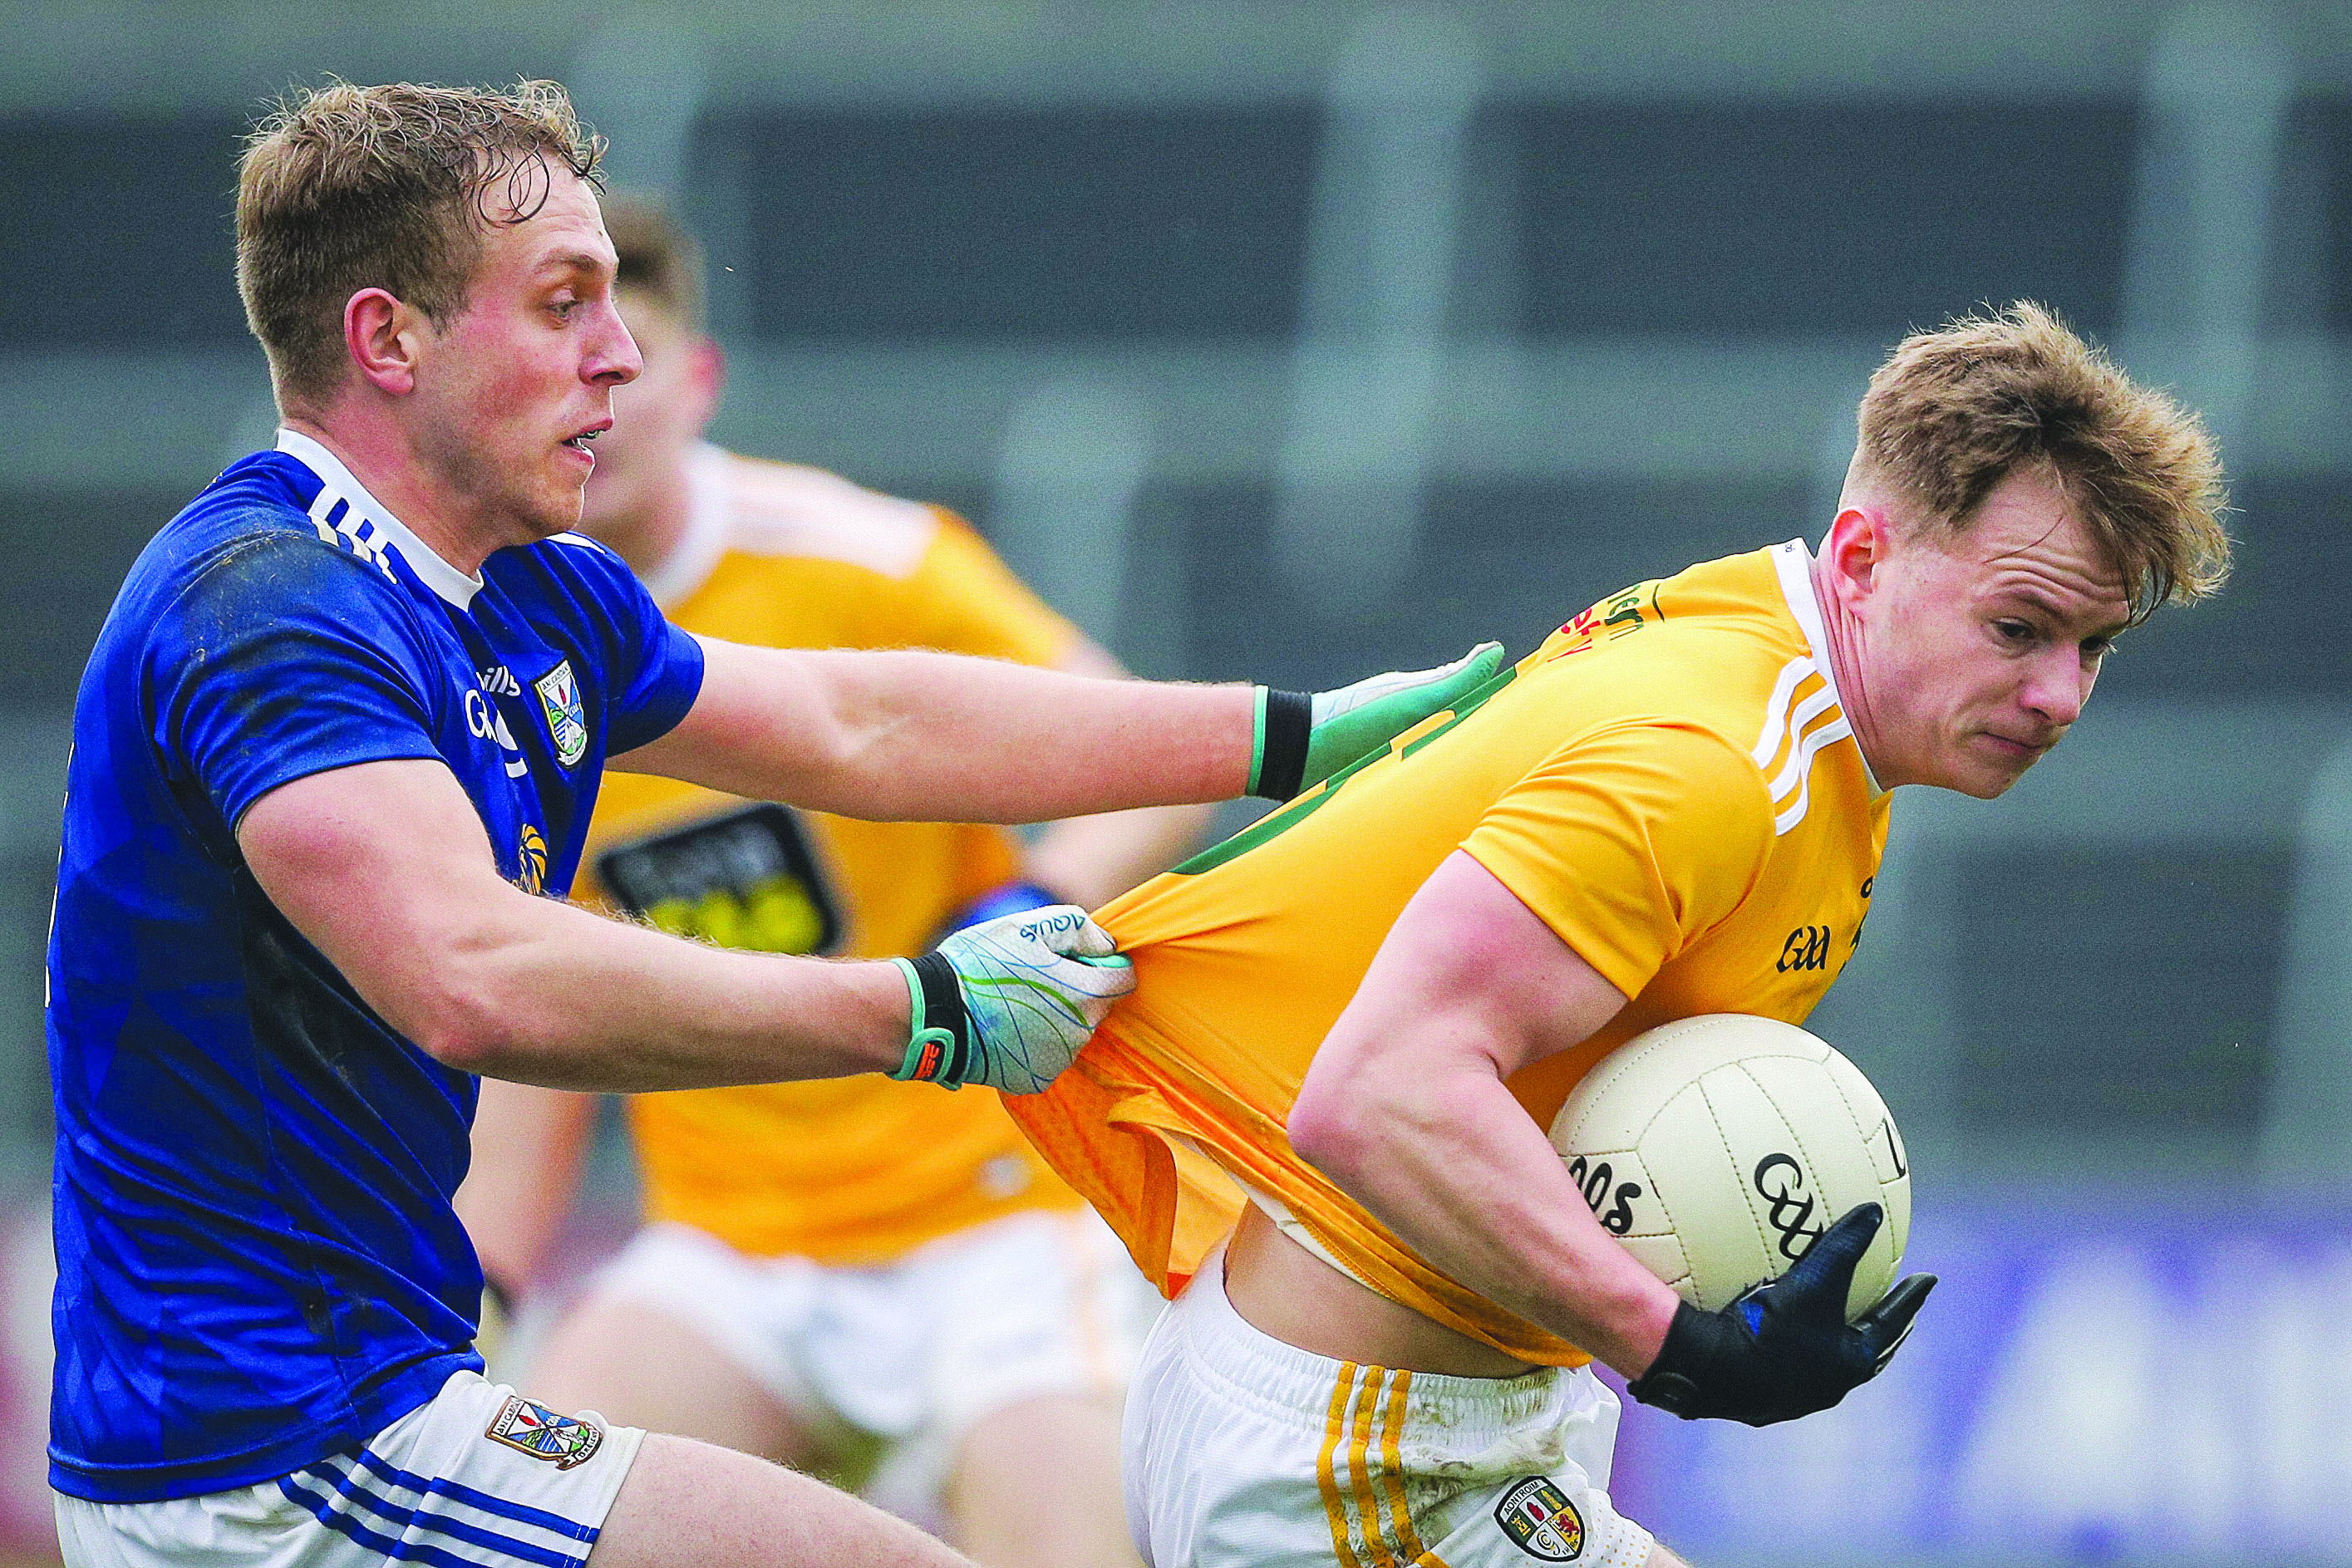 Peter Healy says all involved in the Antrim football set-up are excited for the season ahead